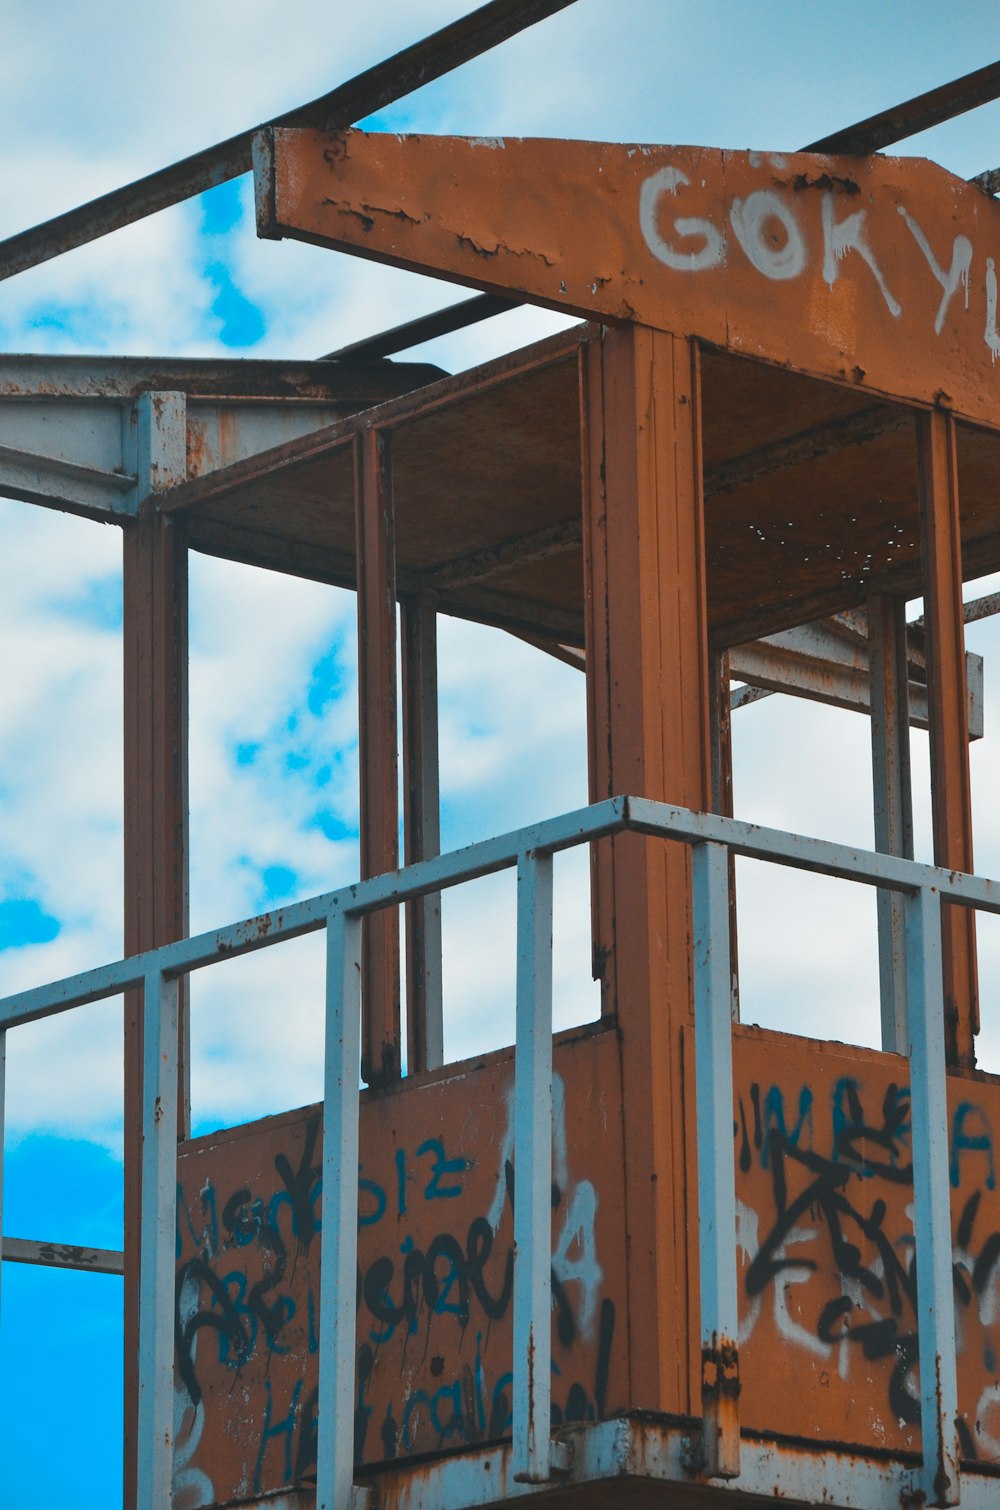 a rusted metal structure with graffiti on it